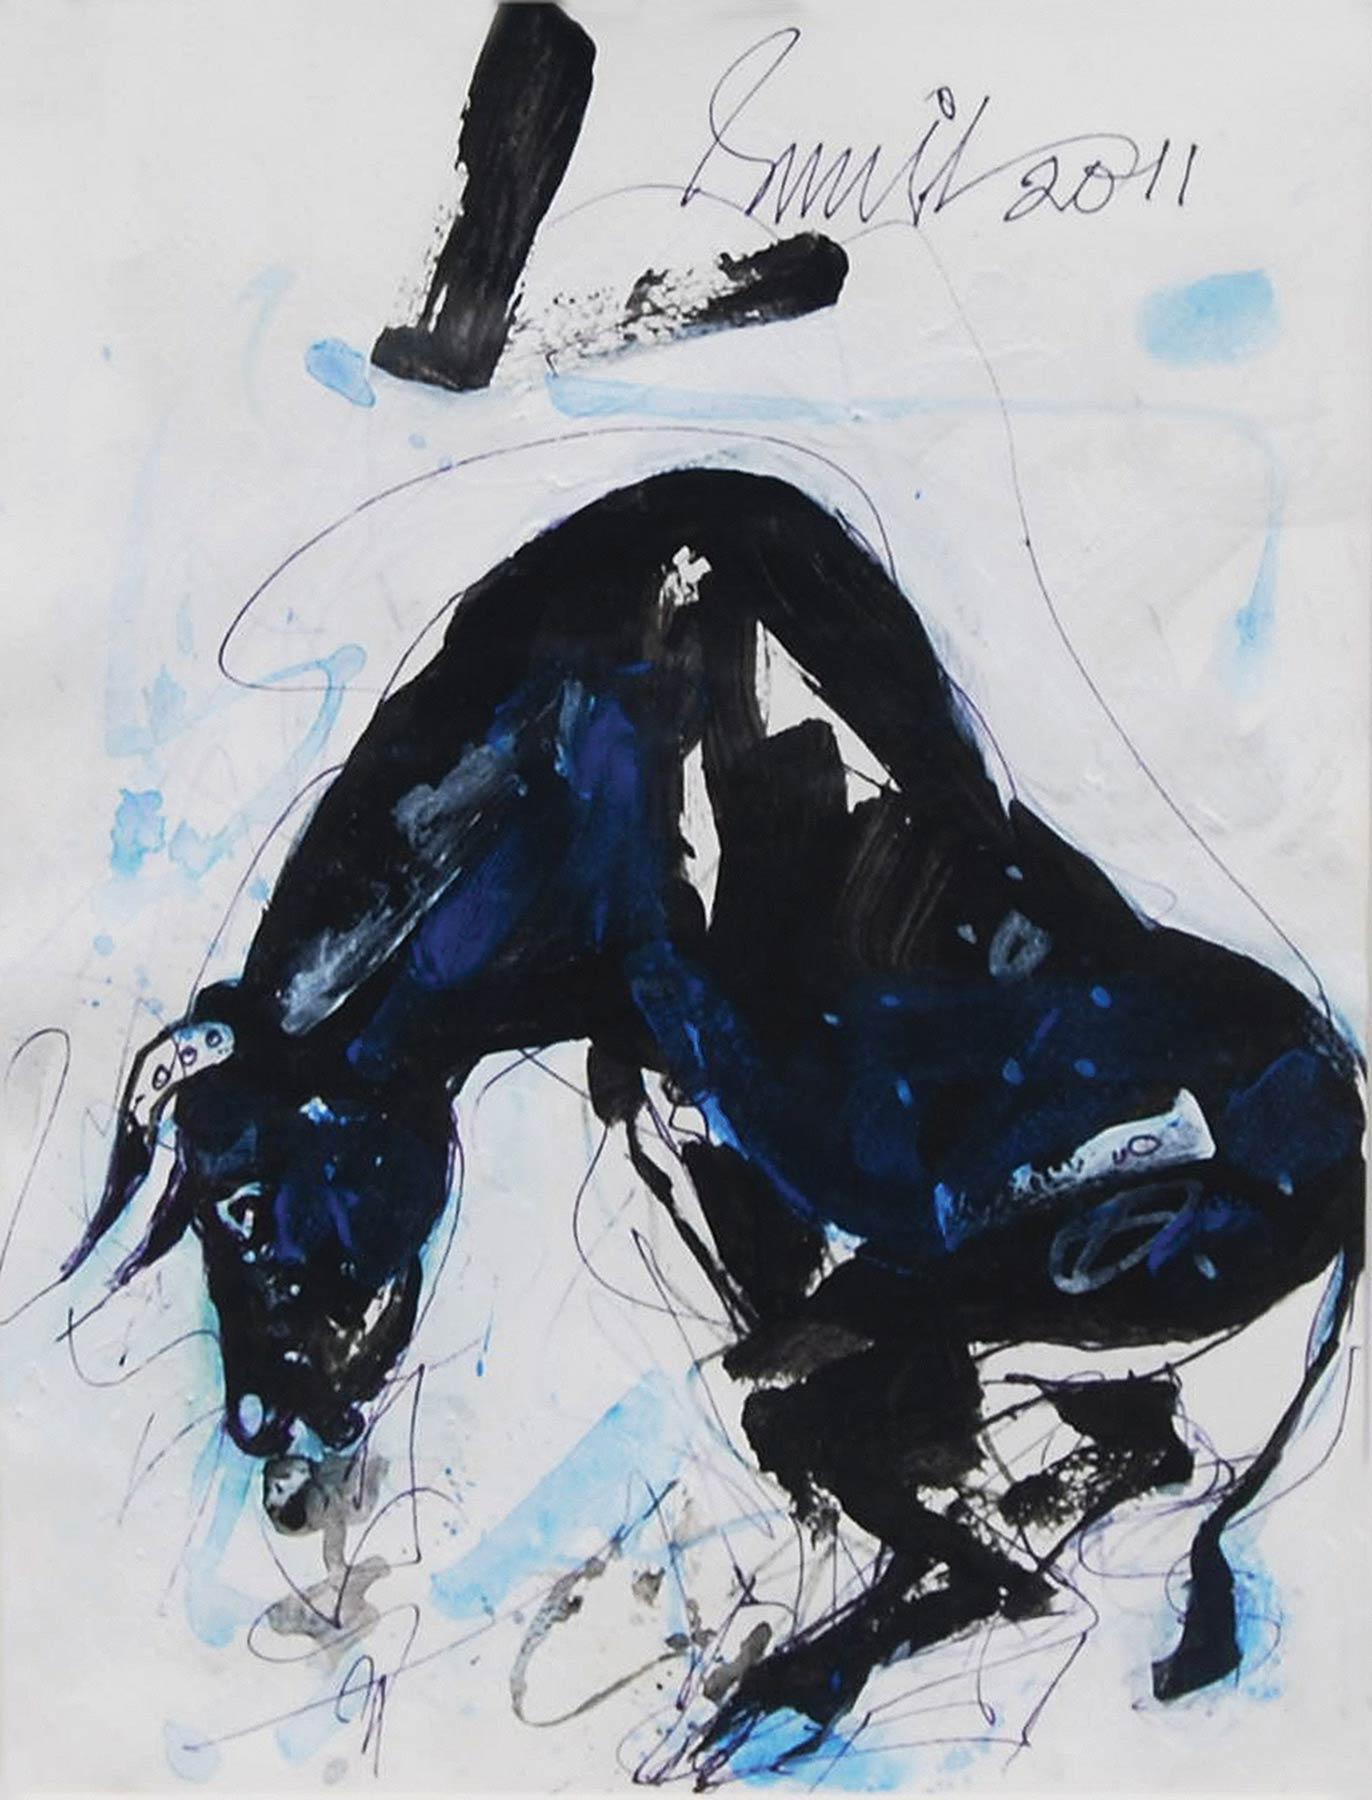 Bull, Mixed Media on paper, Blue, Black, White by Modern Indian Artist"In Stock" - Mixed Media Art by Sunil Das